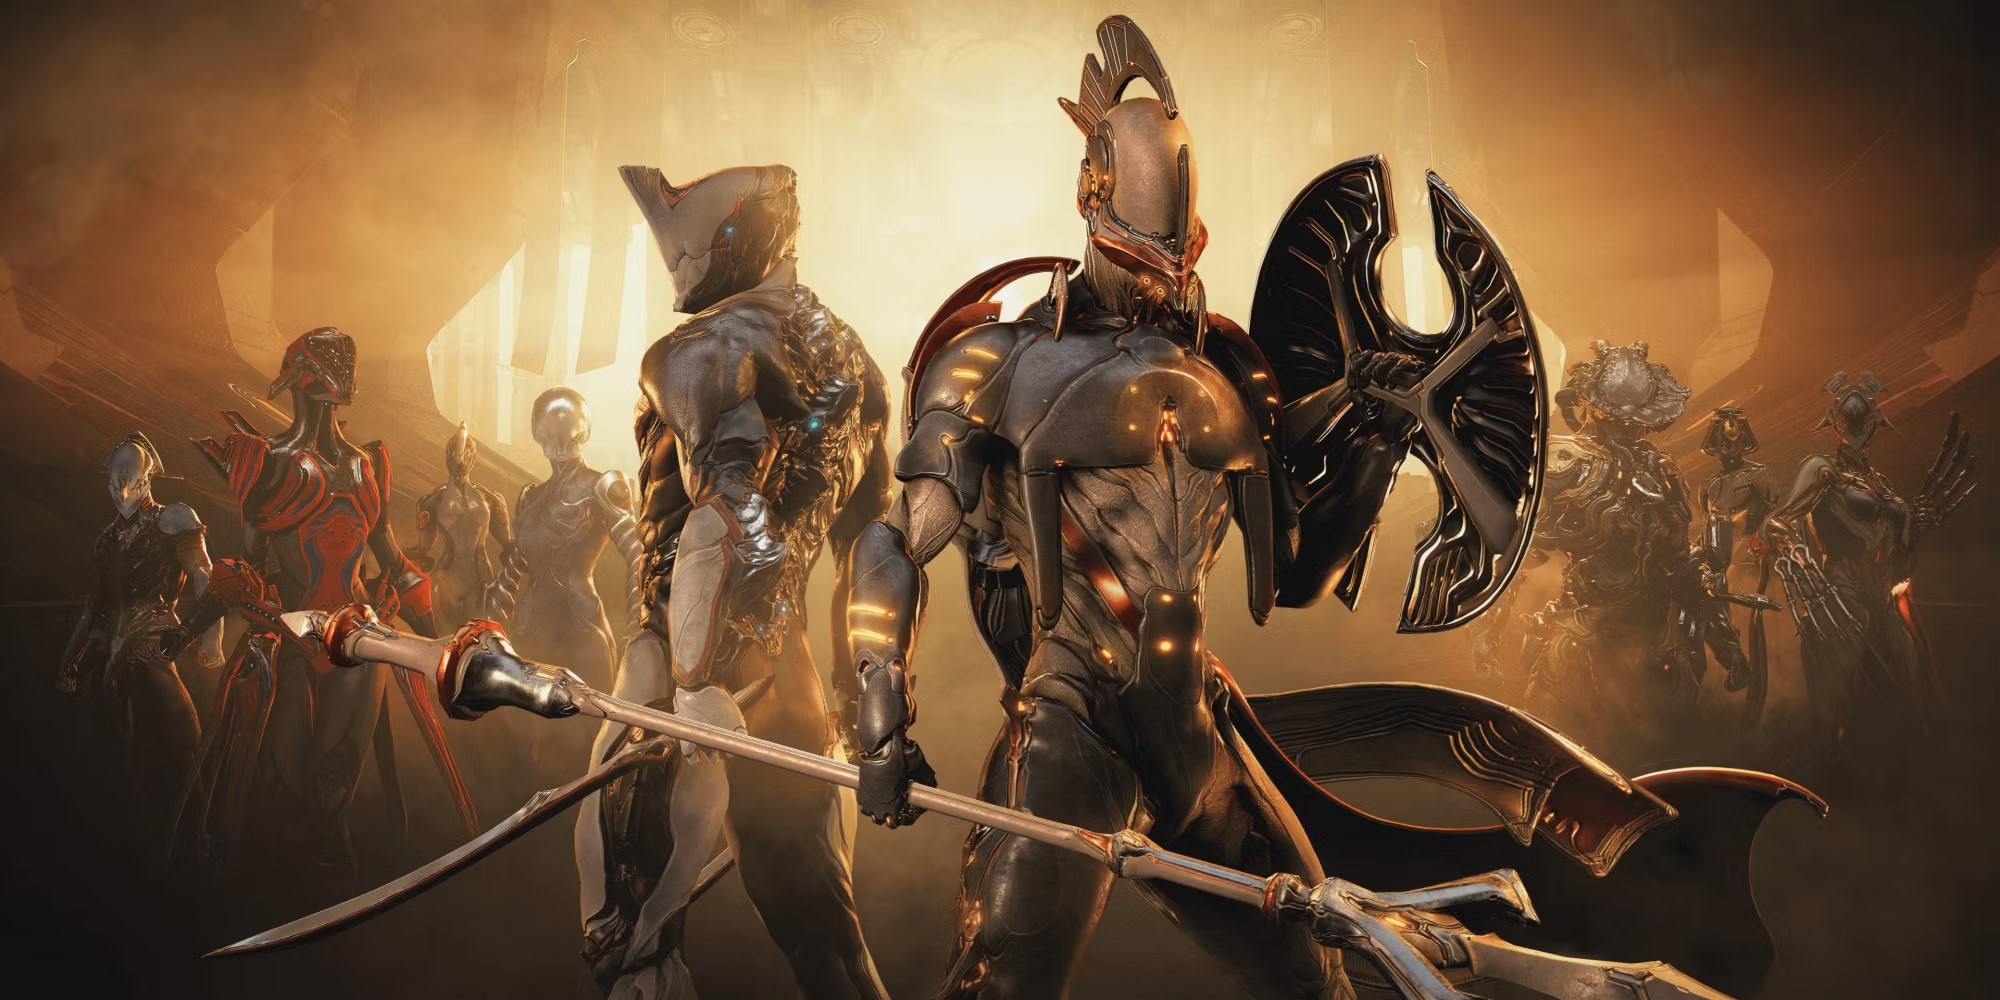 Digital Extremes CEO Steve Sinclair Thinks Big Publishers Dump Live Service Titles Too Early